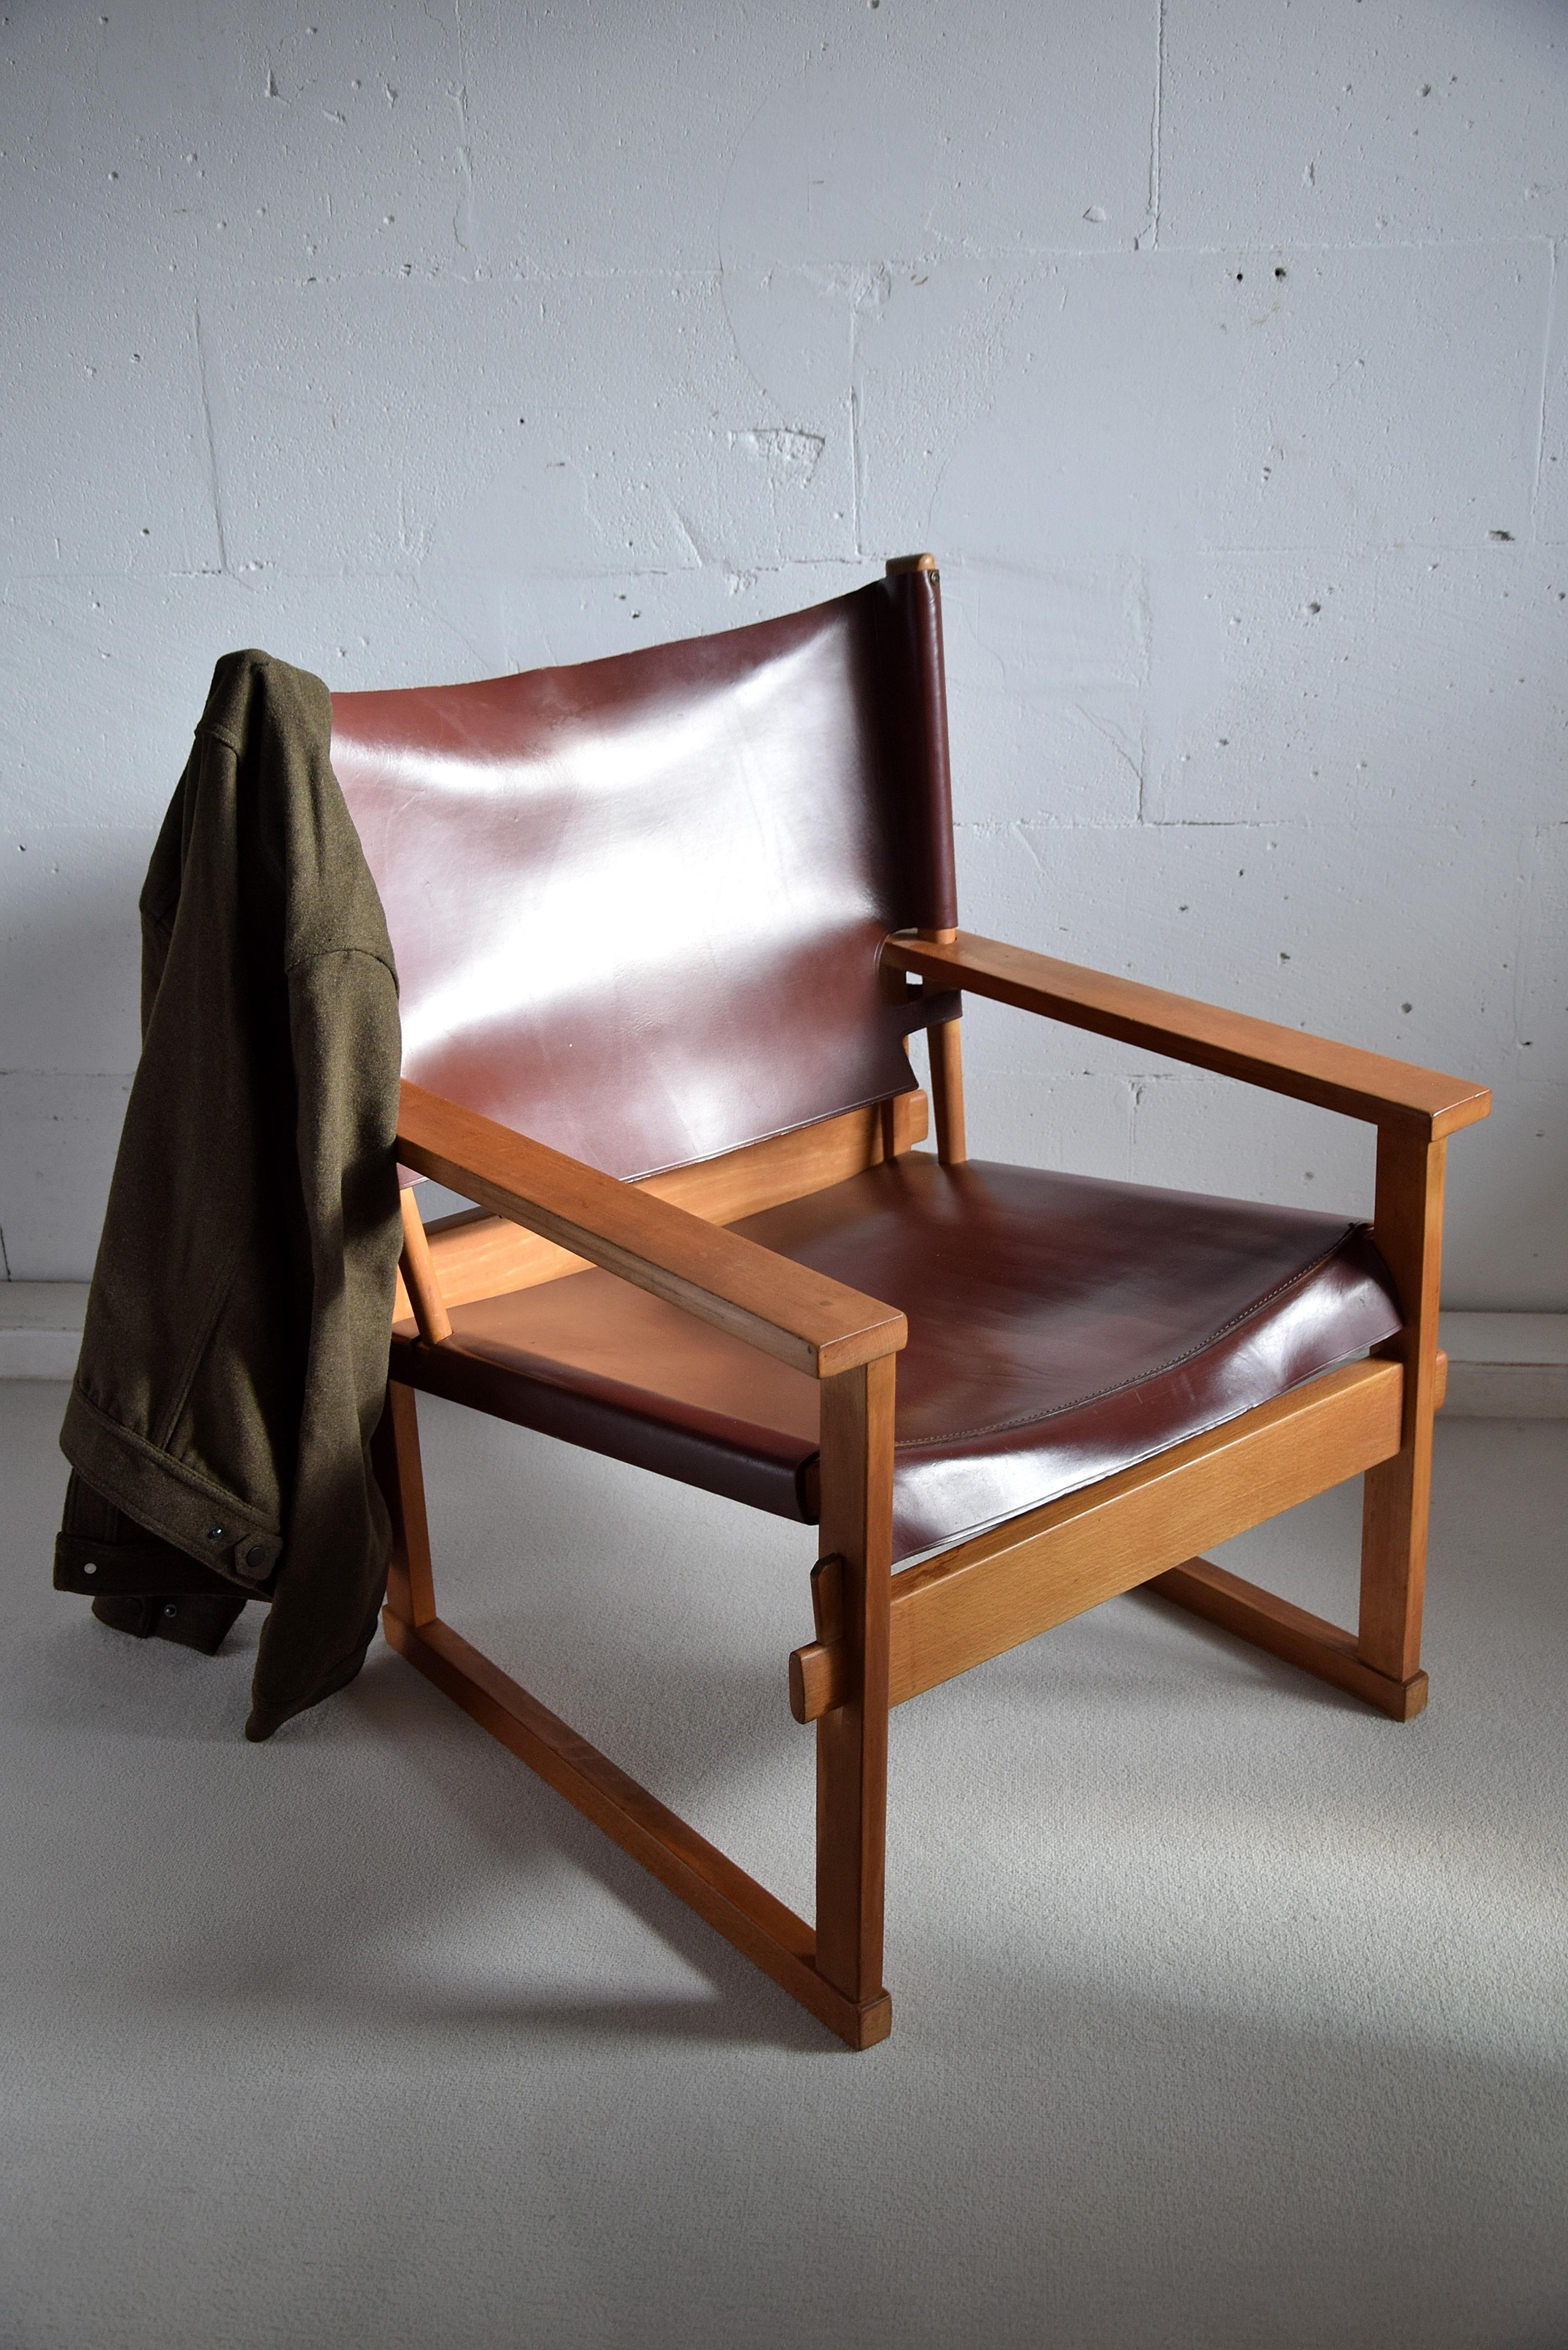 Rare and stylish Safari armchair designed by Poul Hundevad for Vamdrup Denmark, 1950. This solid Oak chair comes with it's original natural leather seat and back. The leather is in great condition as can be seen in the images. Seating height is 45